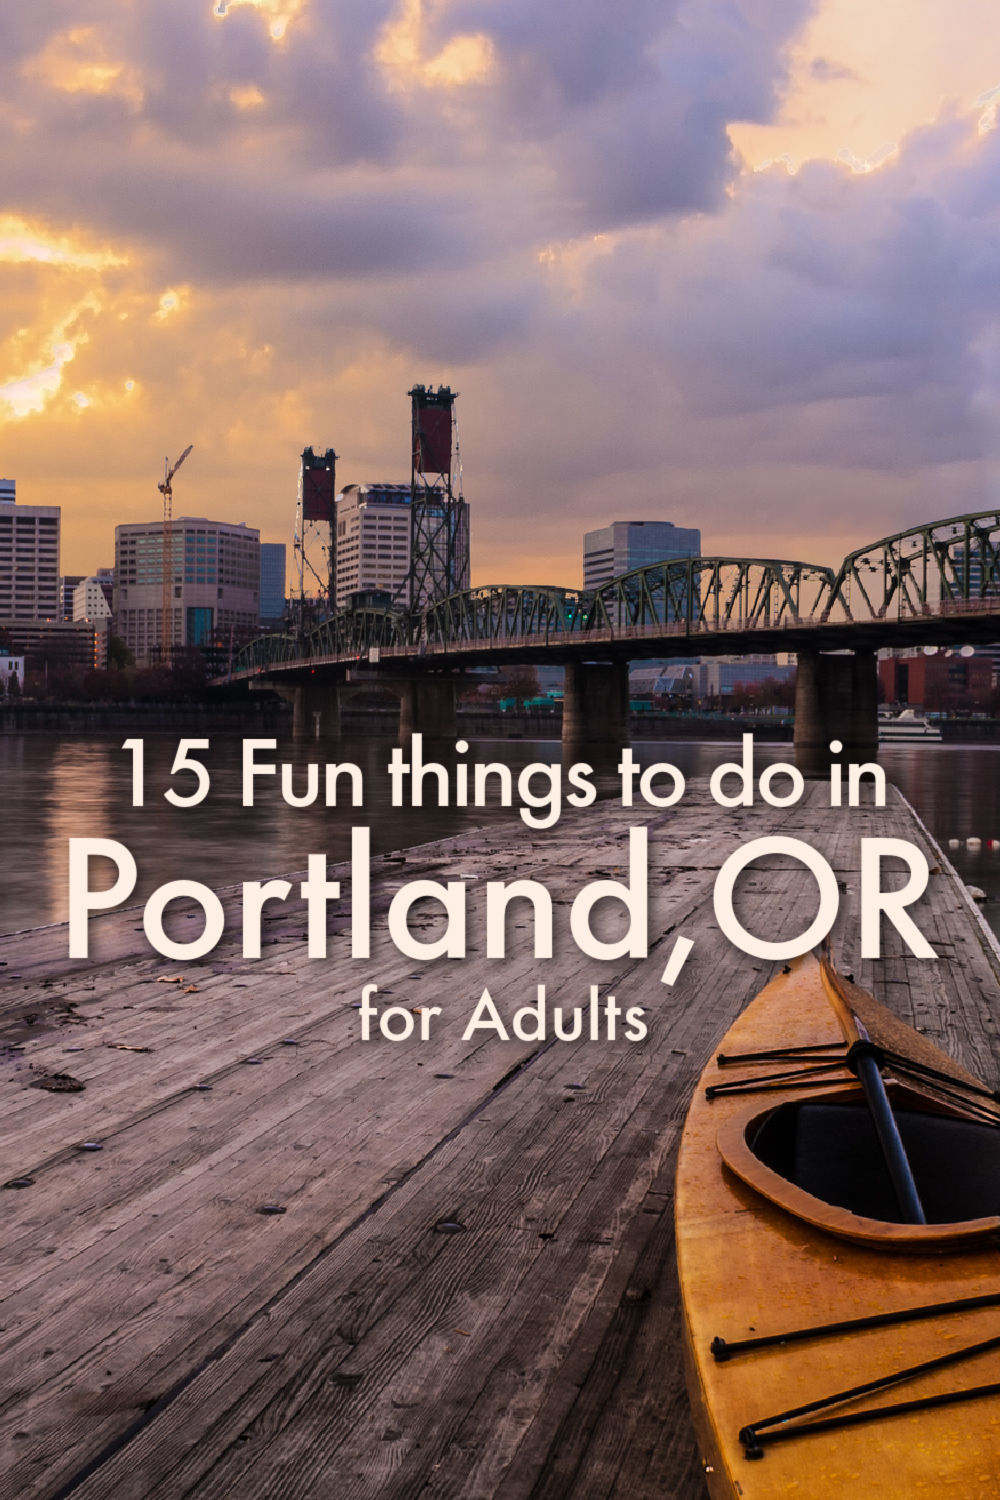 A guide to the best and most fun things to do in Portland for adults. Travel tips, how to get around, what to do, hotels, and places to visit in Portland, Oregon.From outdoor activities to arts, books, donuts, and nights out, we cover it all.Things to do in Portland | Portland things to do | Portland Oregon | Portland attractions | Portland hotels | Portland breweries | Portland photos |